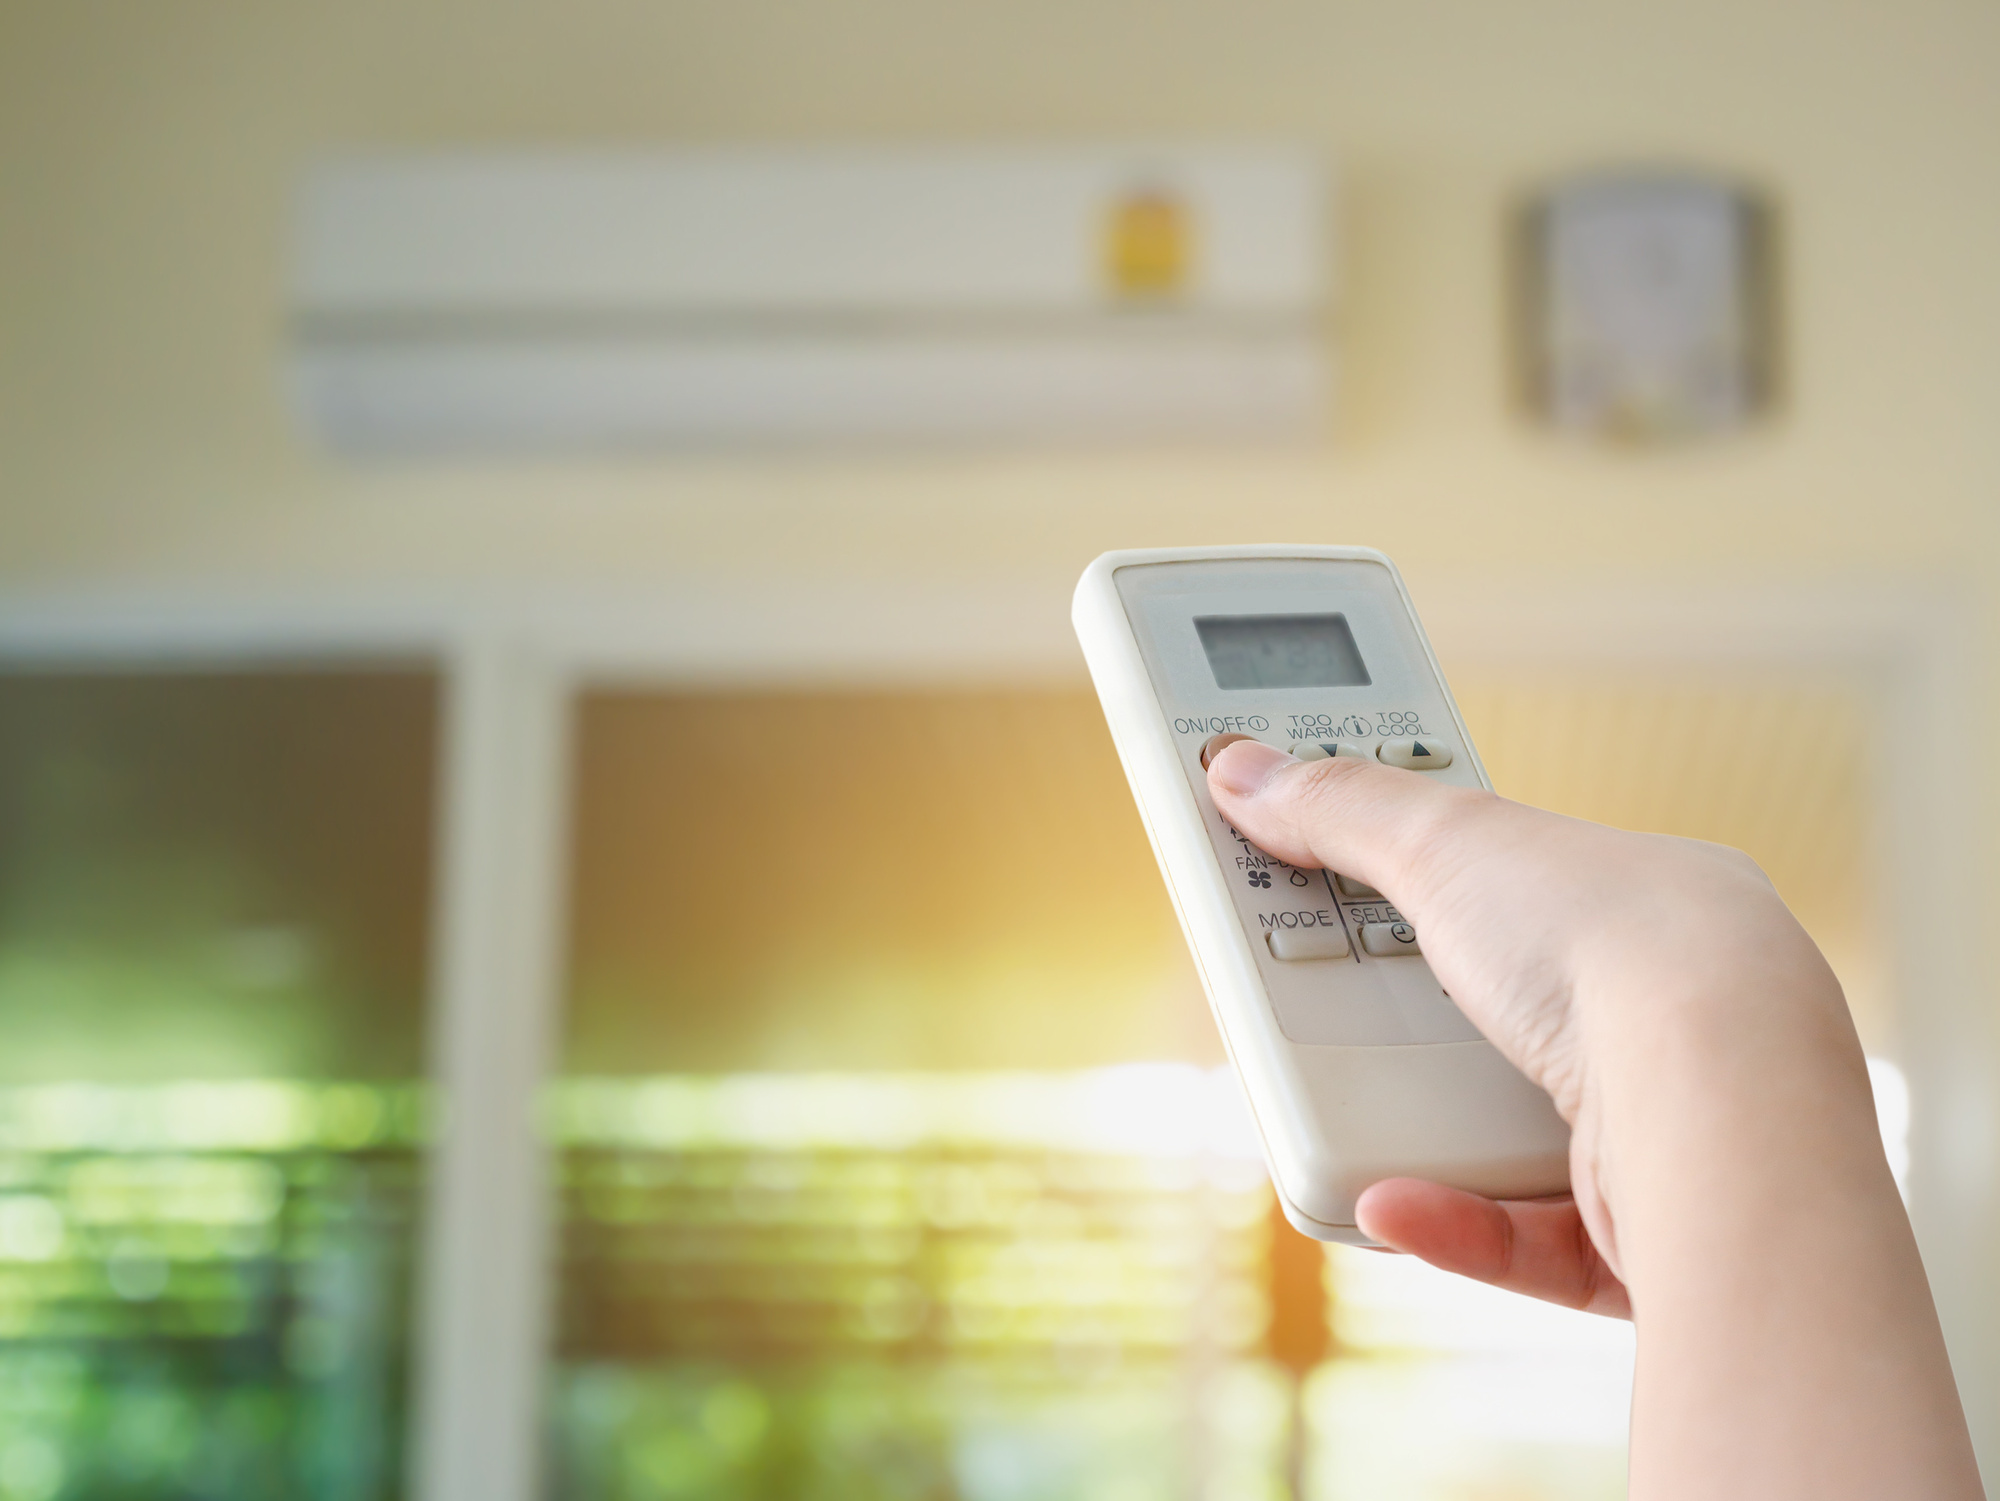 There are several types of air conditioners that you have to choose from for your home. Learn more about these options right here.